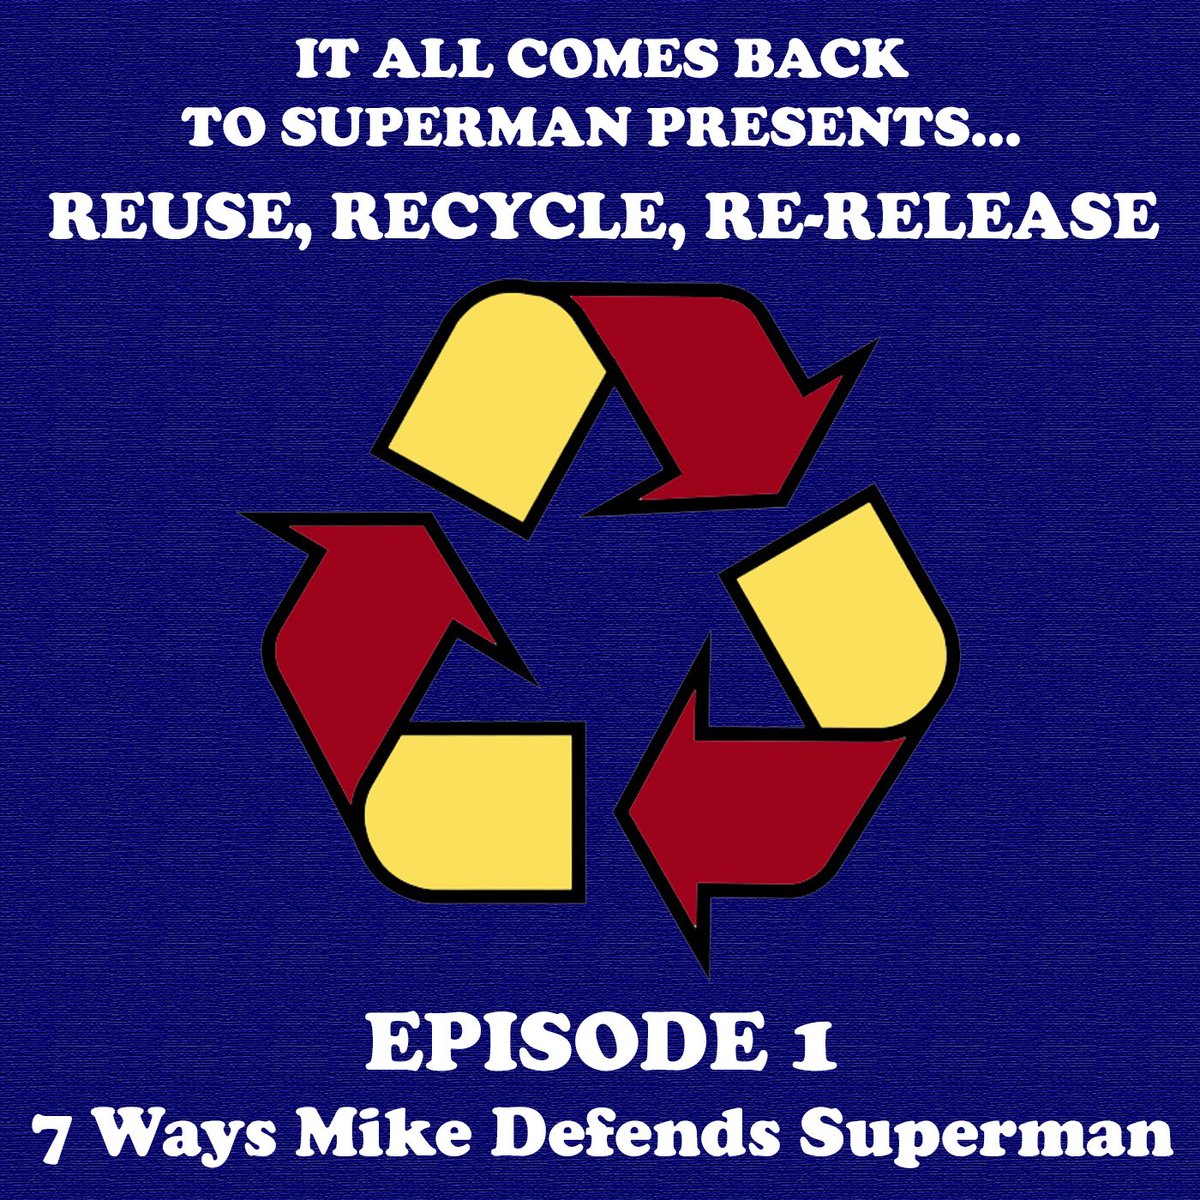 Starting a new/old series on IACBTS today! Reuse, Recycle, Re-Release! I have done a lot of Superman content over the years & I thought it would be fun to re-release some of the old stuff. First up, something from 2013 originally put out as Views 150. sites.libsyn.com/497023/it-all-…